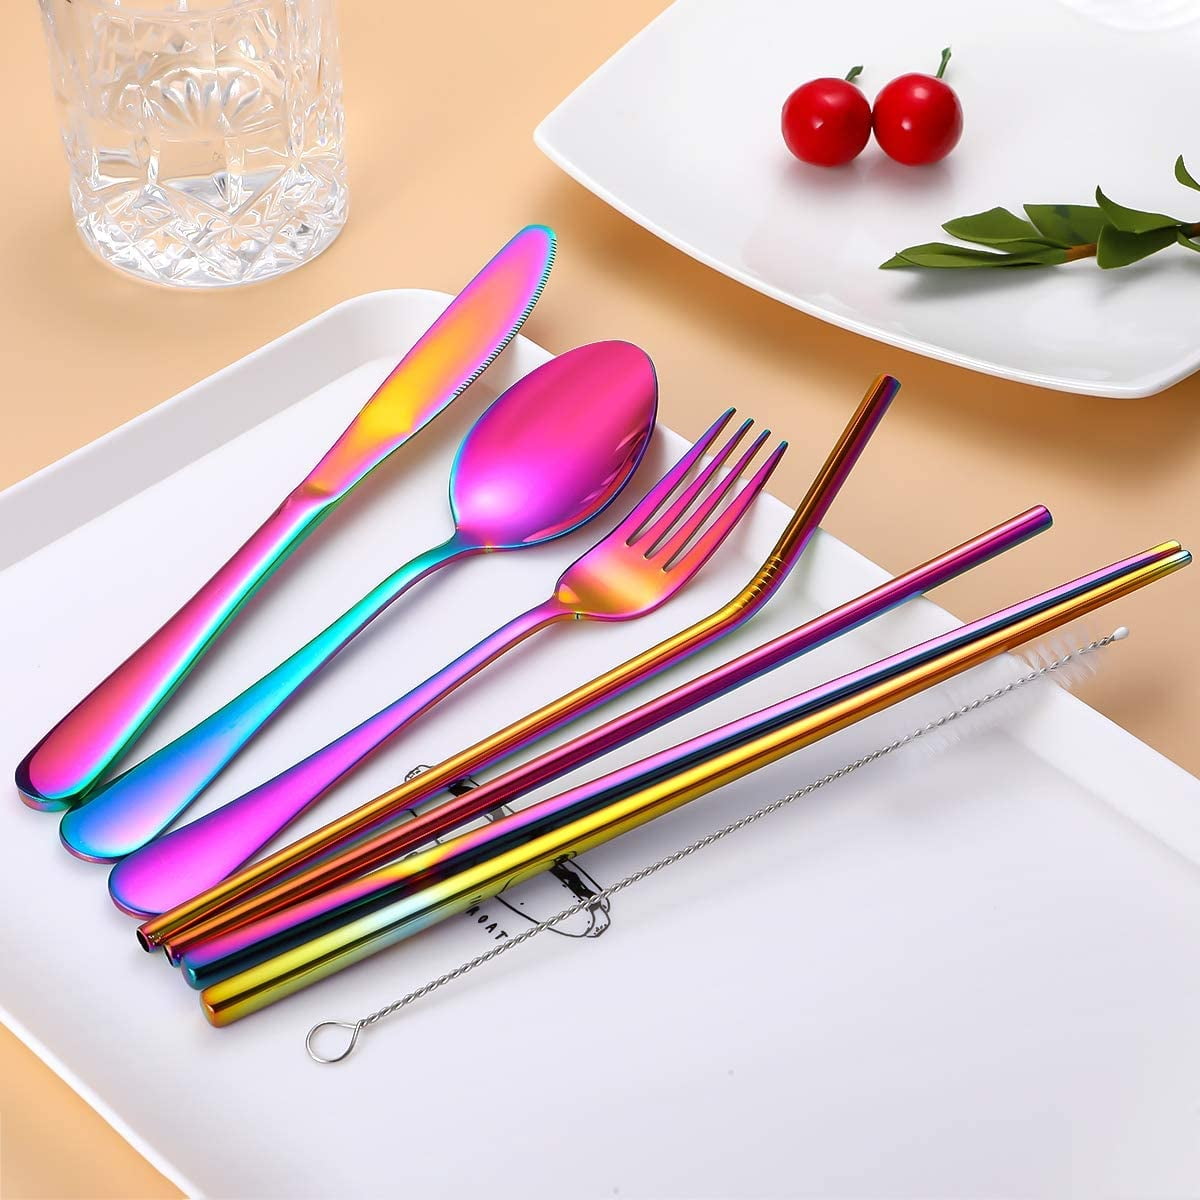 Travel Utensils, Reusable Silverware Set To Go Portable Cutlery Set with a  Waterproof Carrying Case for Lunch Boxes Workplace Camping School Picnic (5  Pcs) 